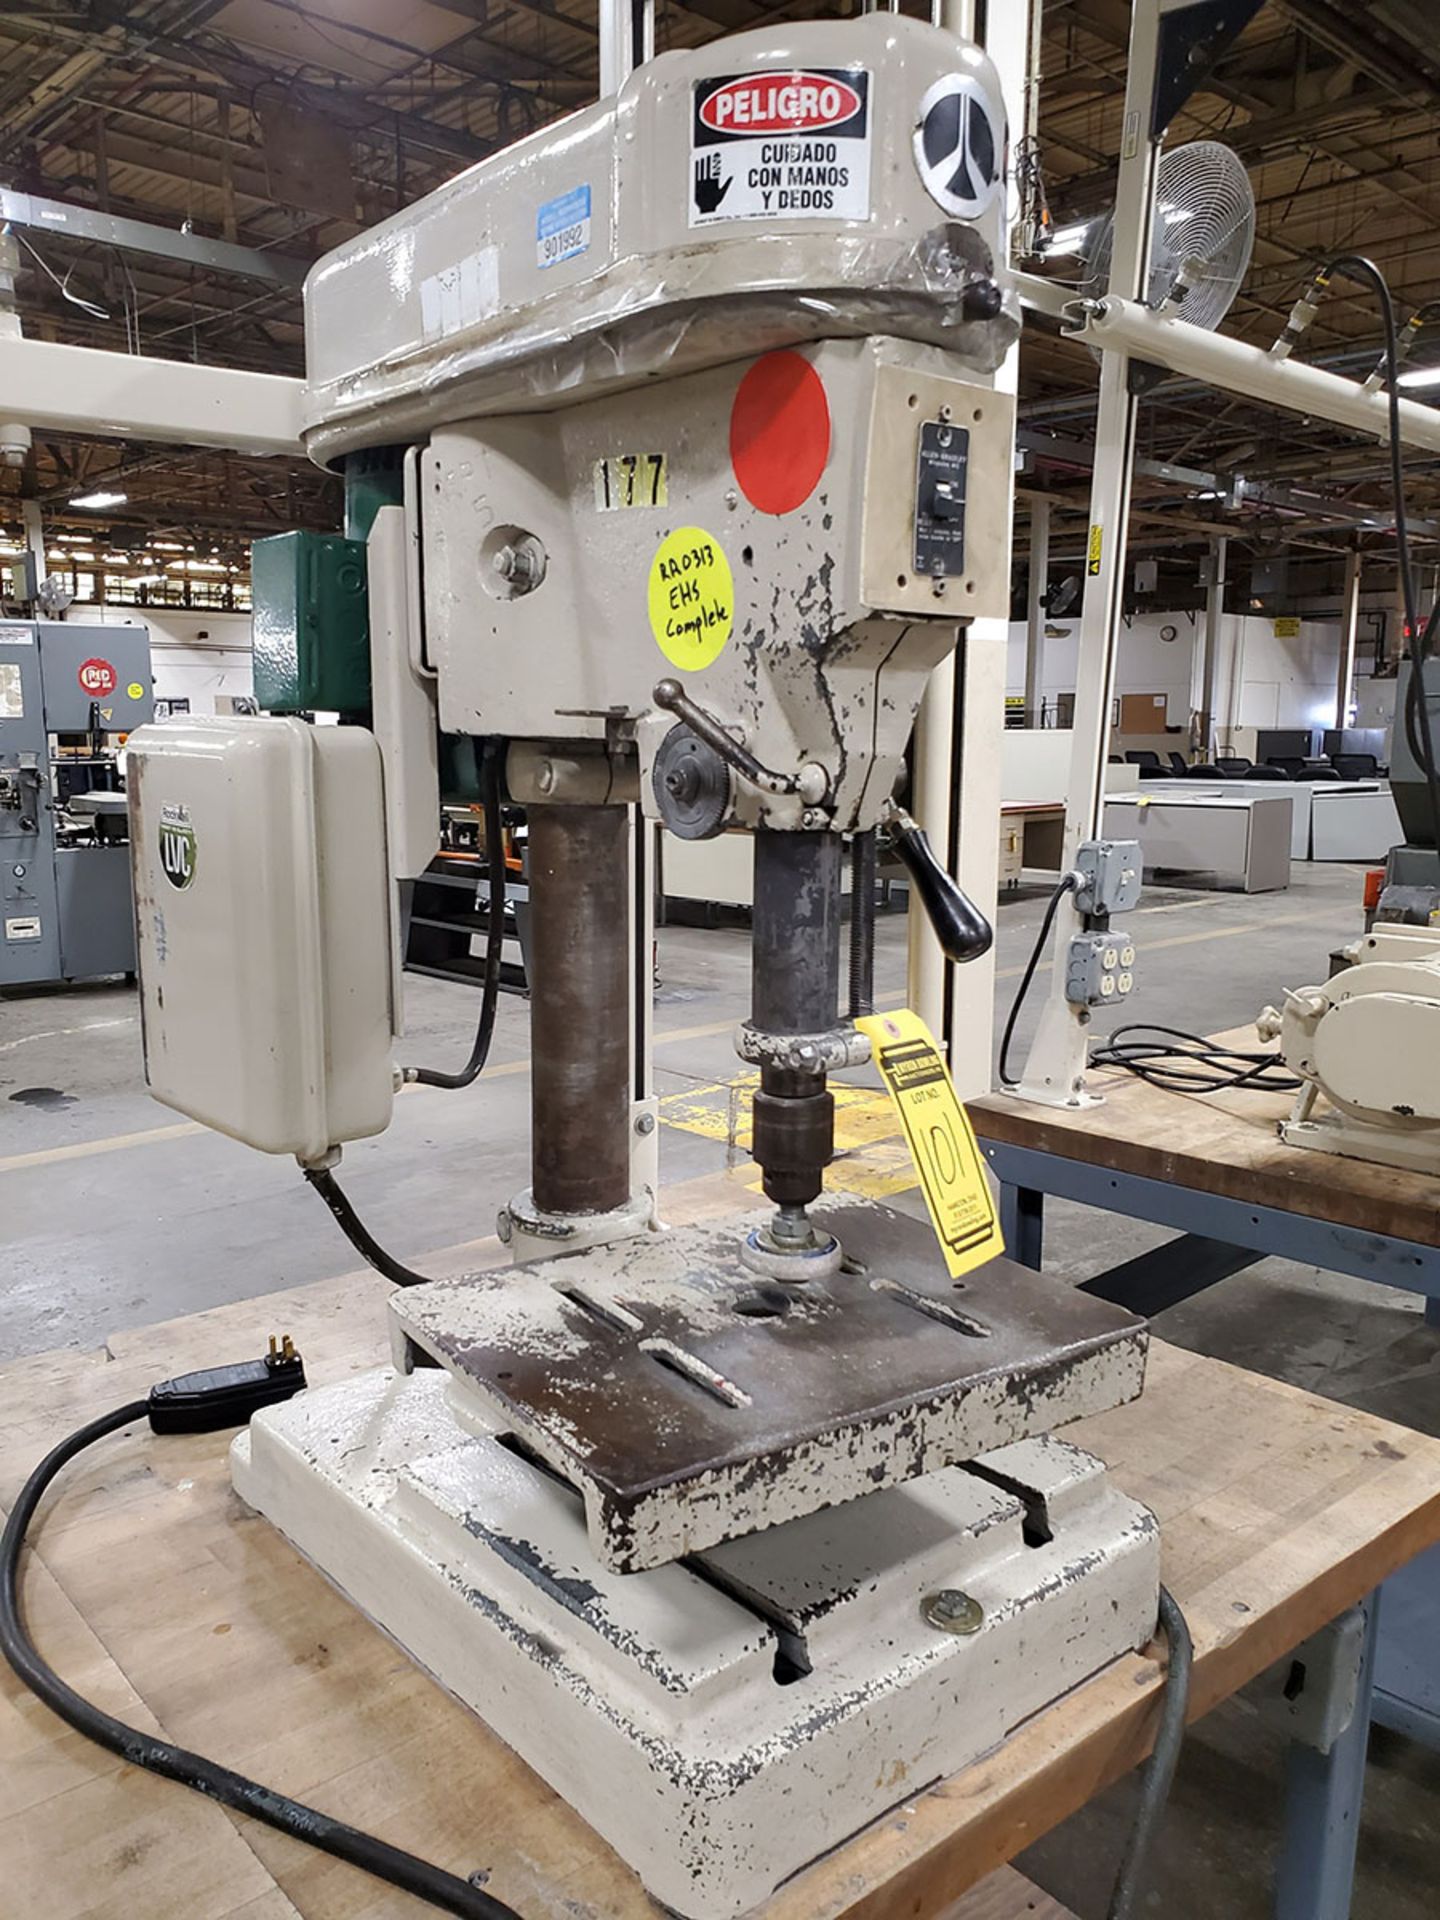 ROCKWELL VERTICAL DRILL PRESS; S/N 1818982 & BALDOR GRINDER/BUFFER; CAT 623E, BOTH MOUNTED ON - Image 3 of 6